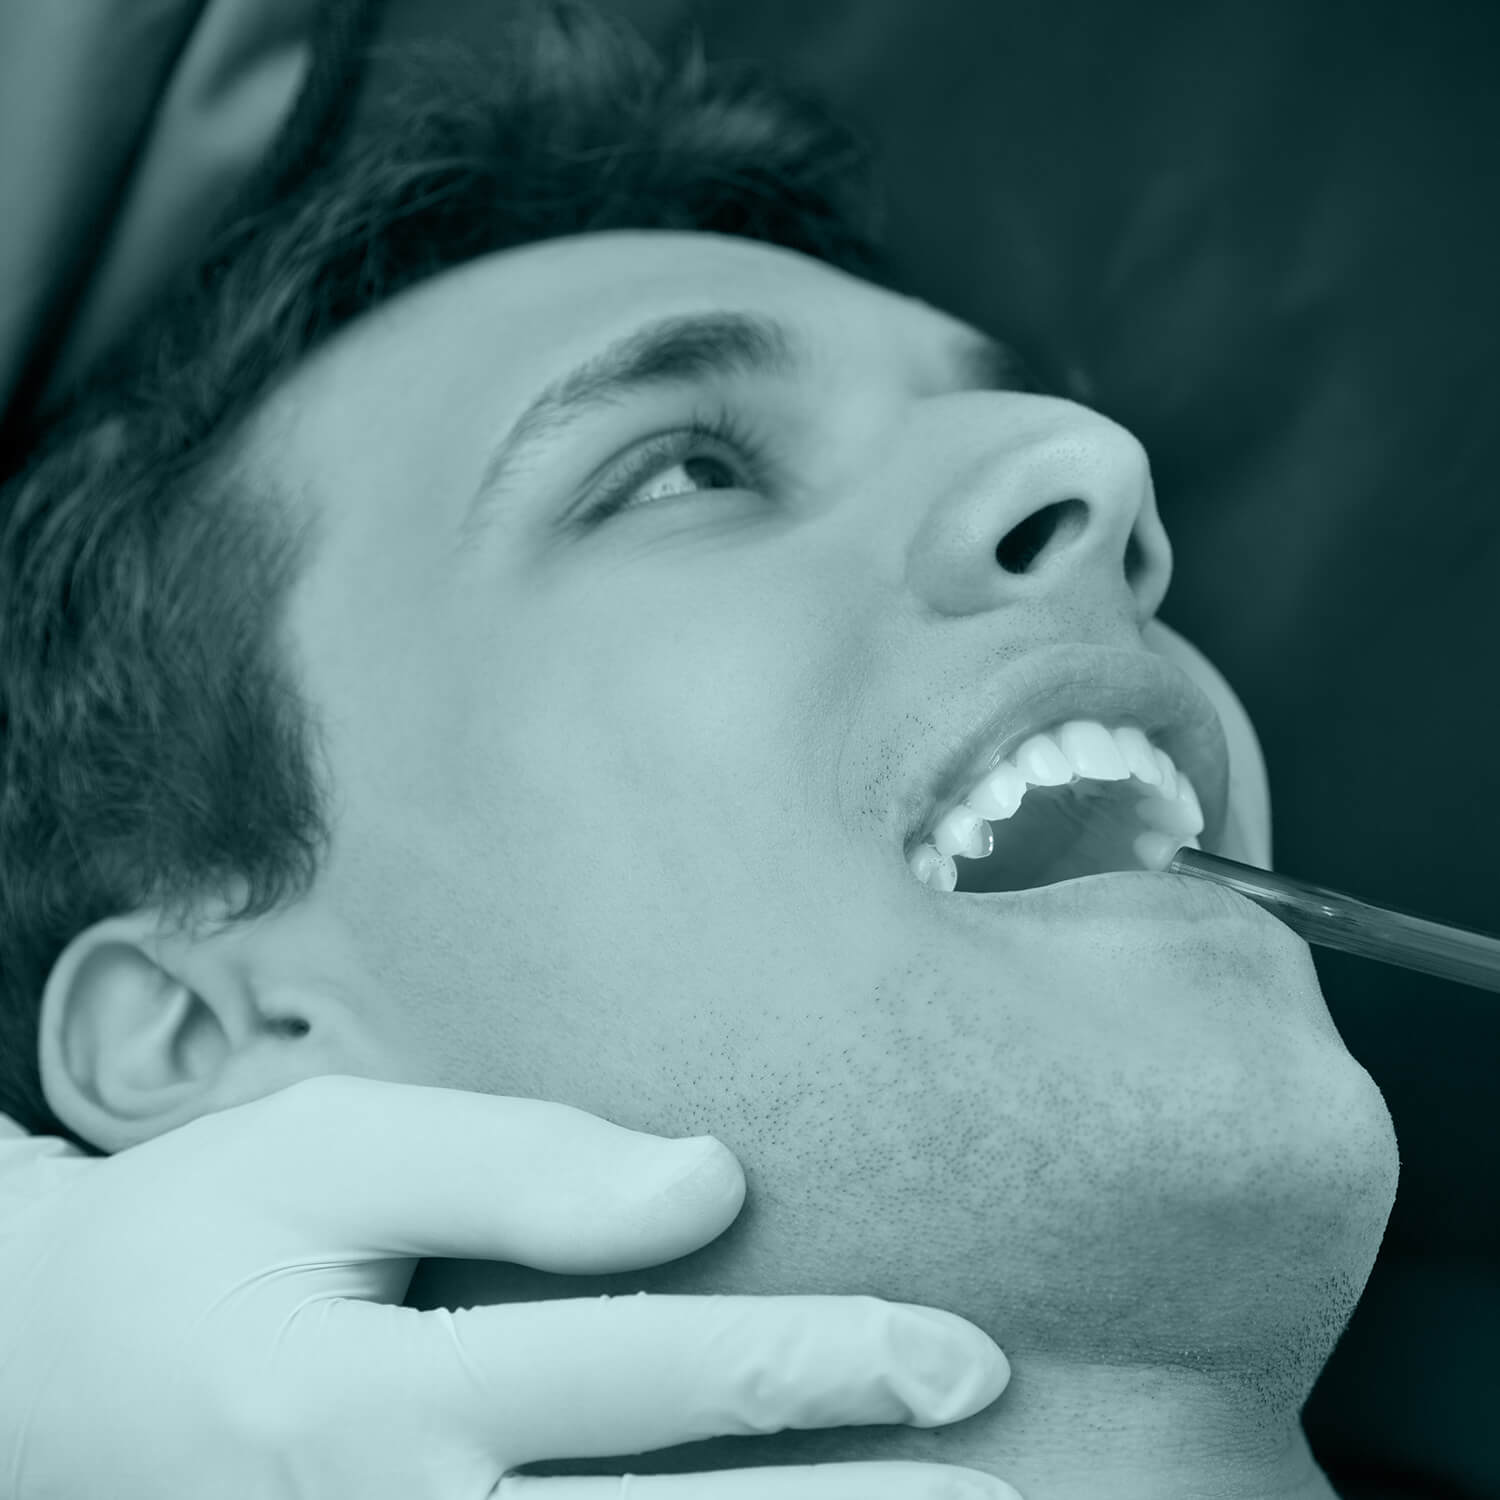 man at a dentist with his open mouth and the laser light treatment